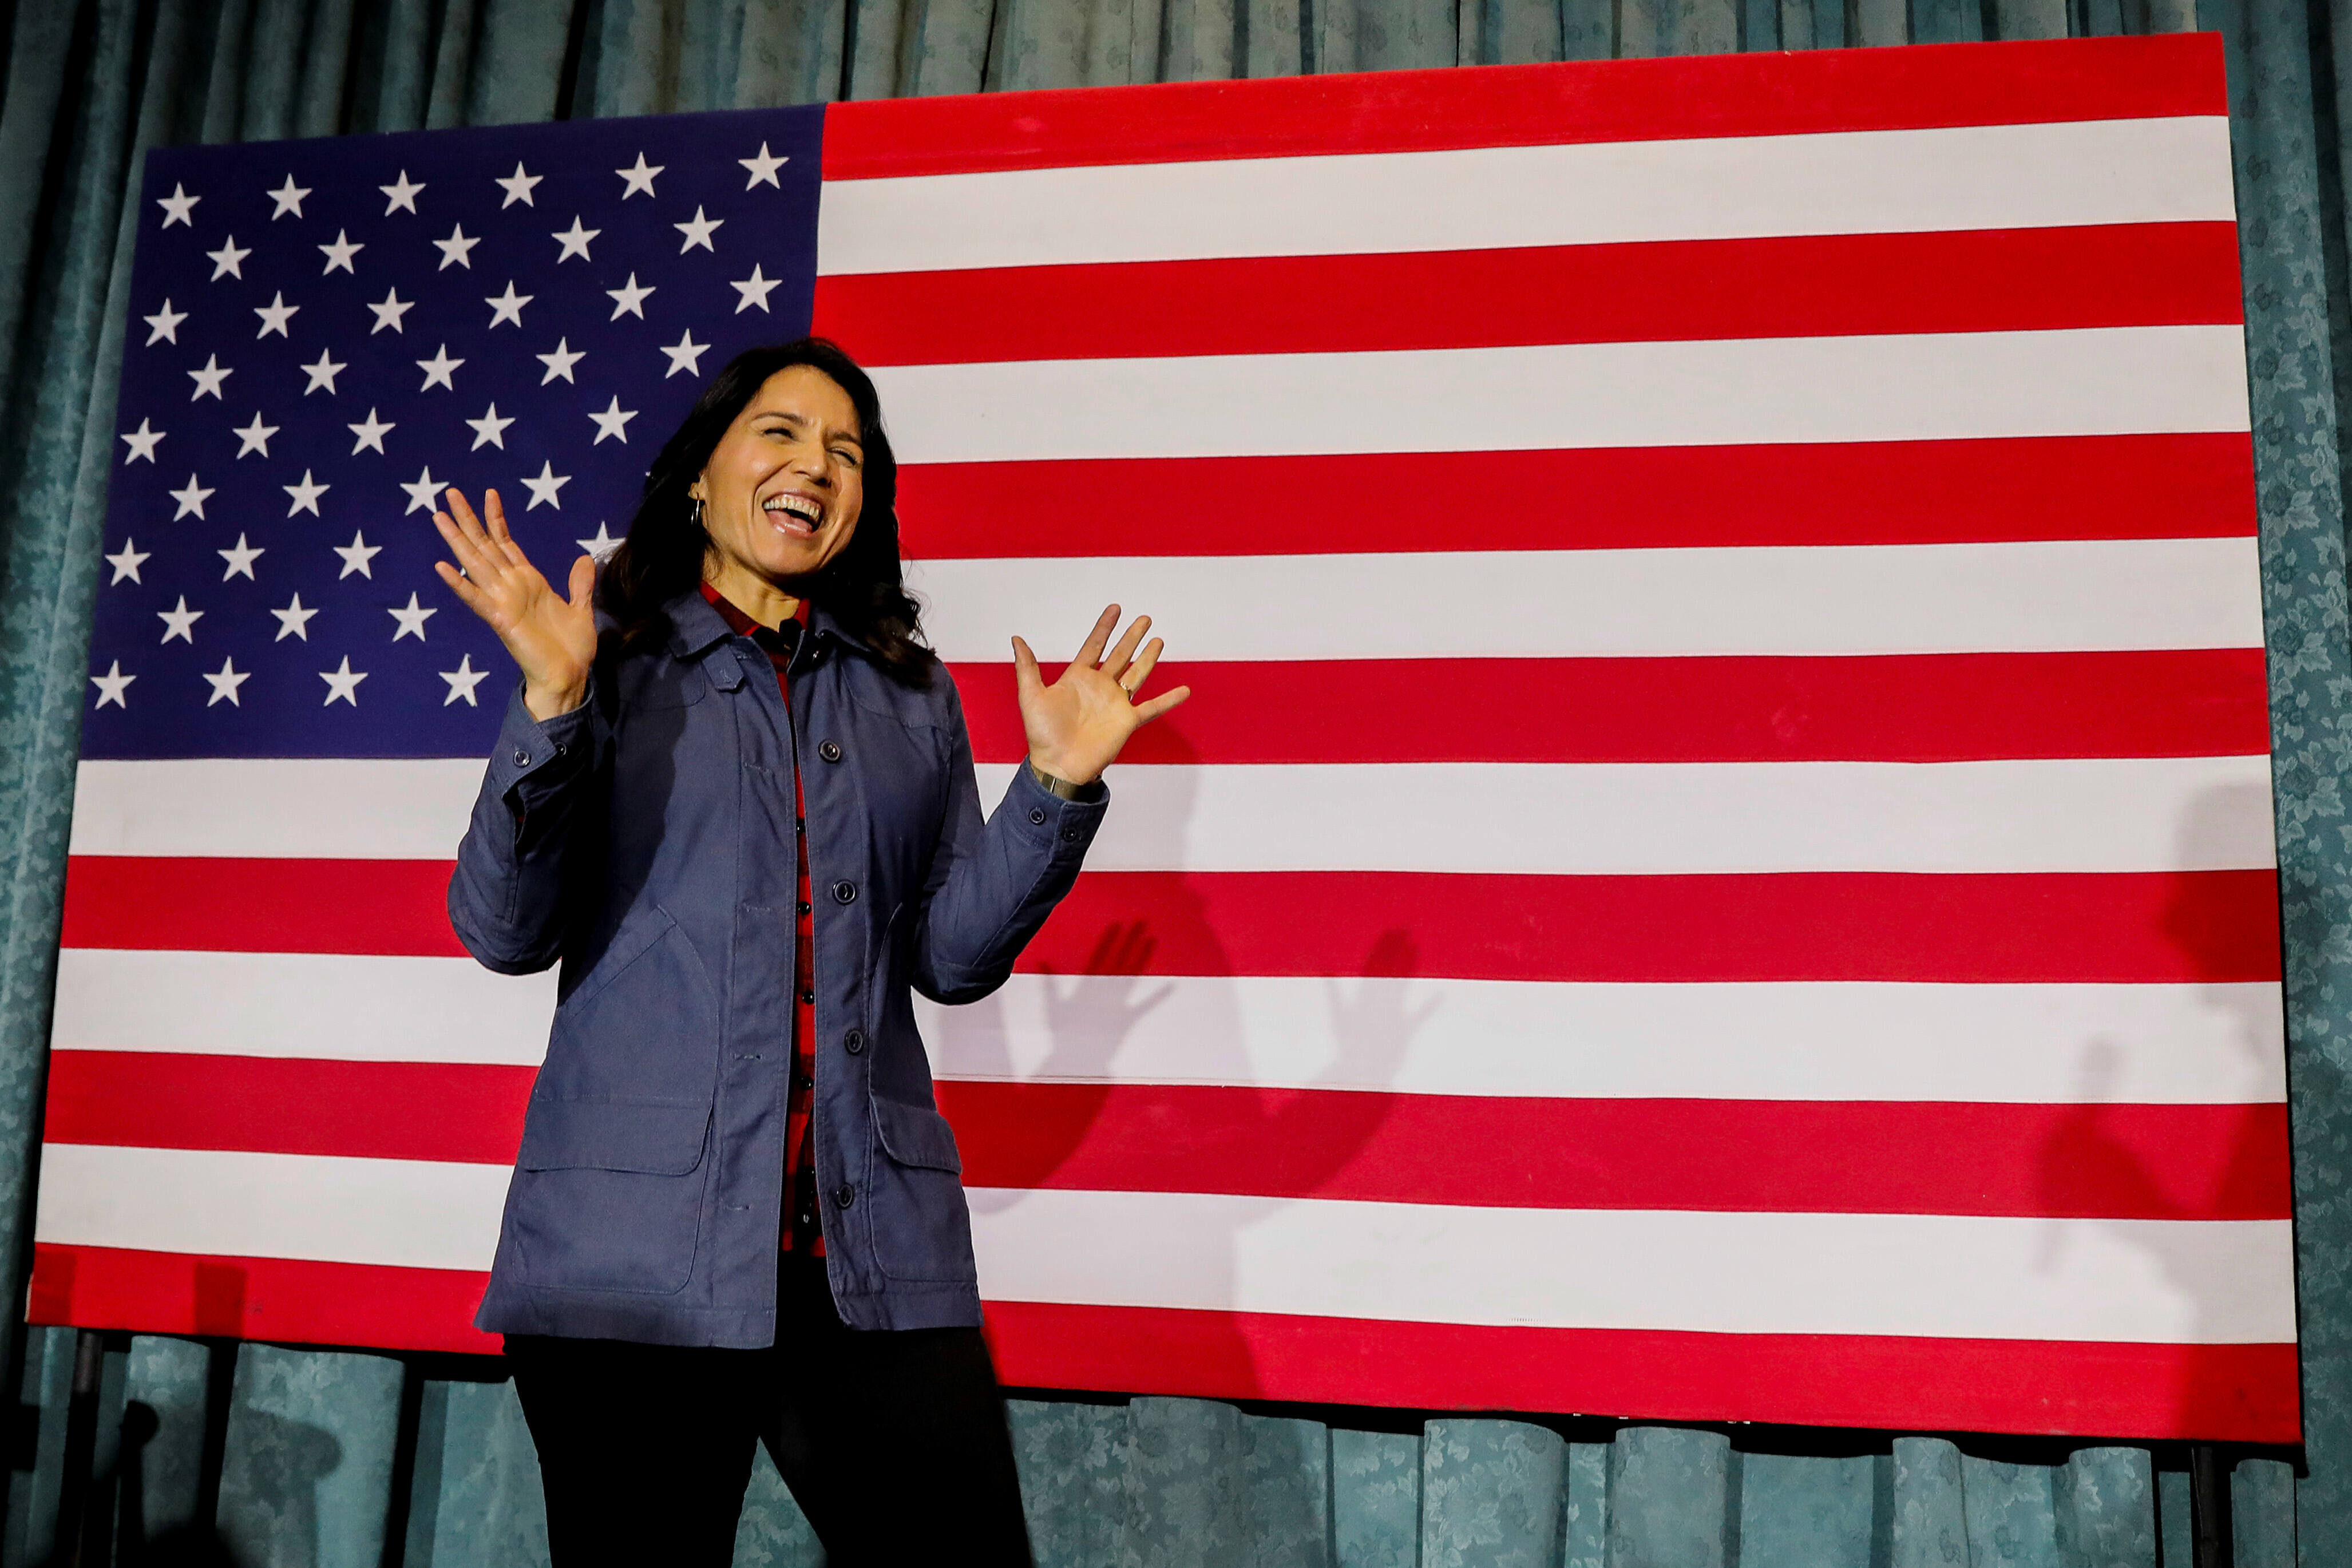 Former US Presidential Candidate Tulsi Gabbard exits Democratic Party